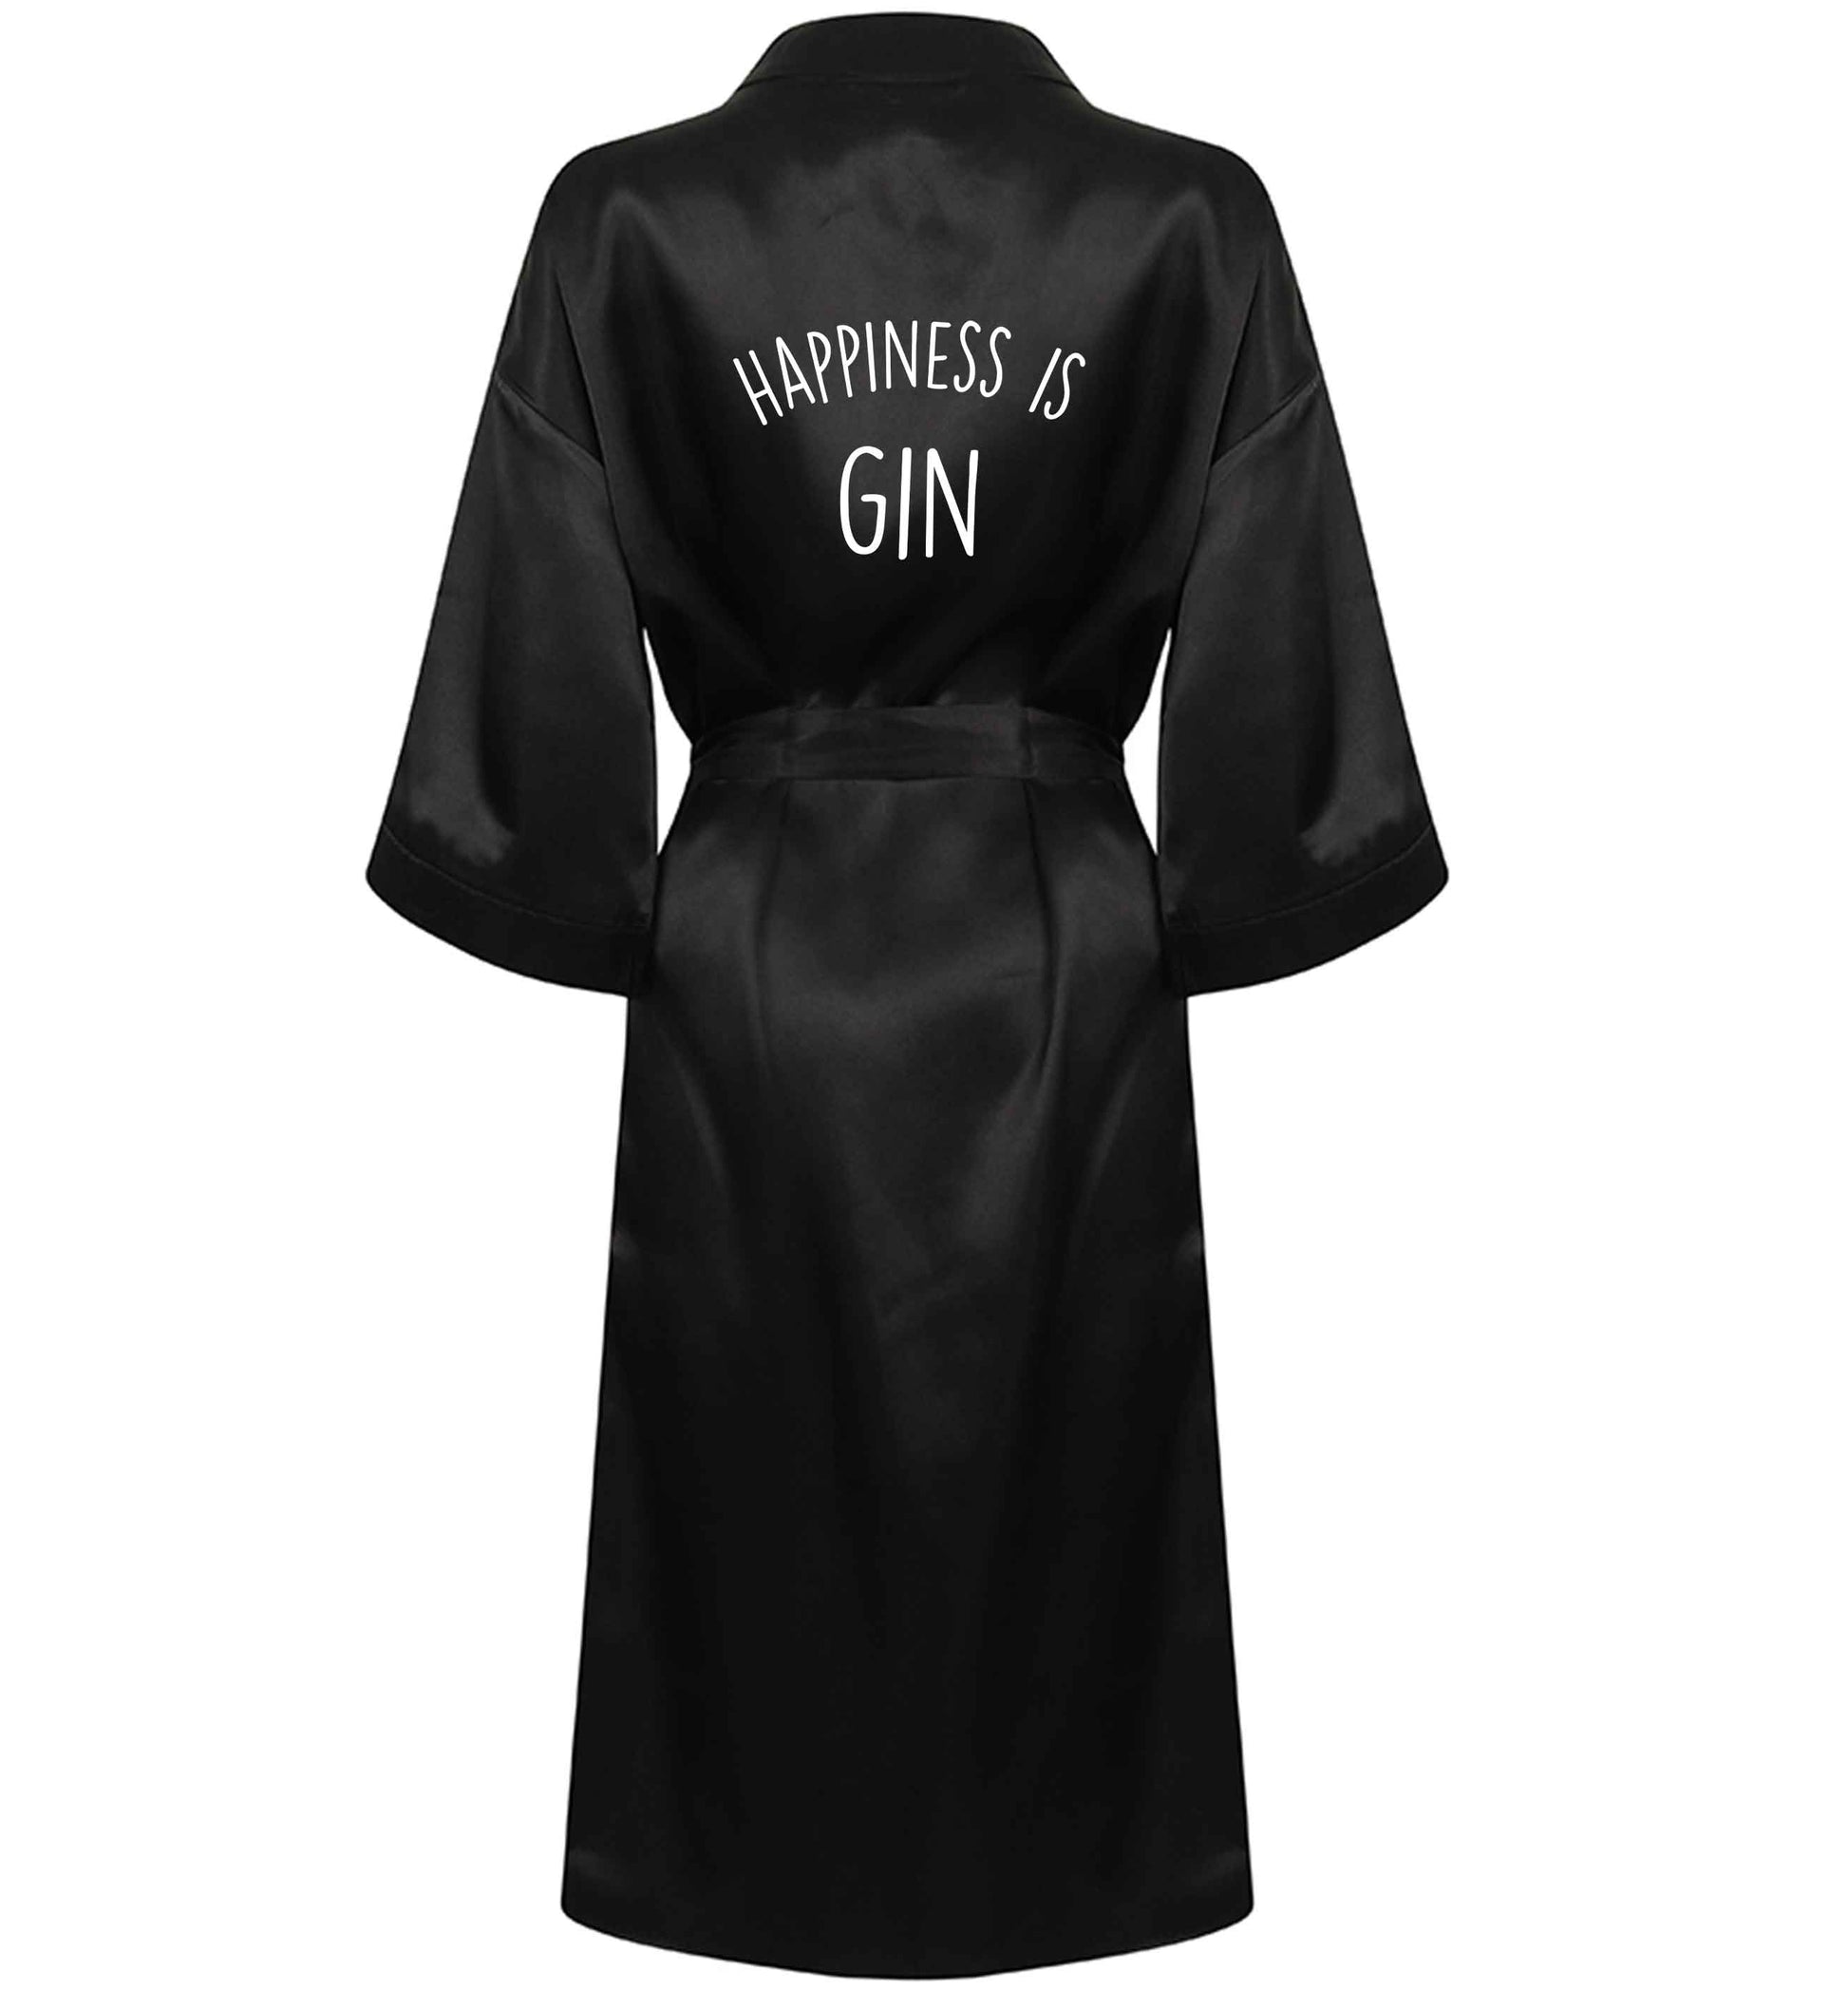 Happiness is gin XL/XXL black ladies dressing gown size 16/18